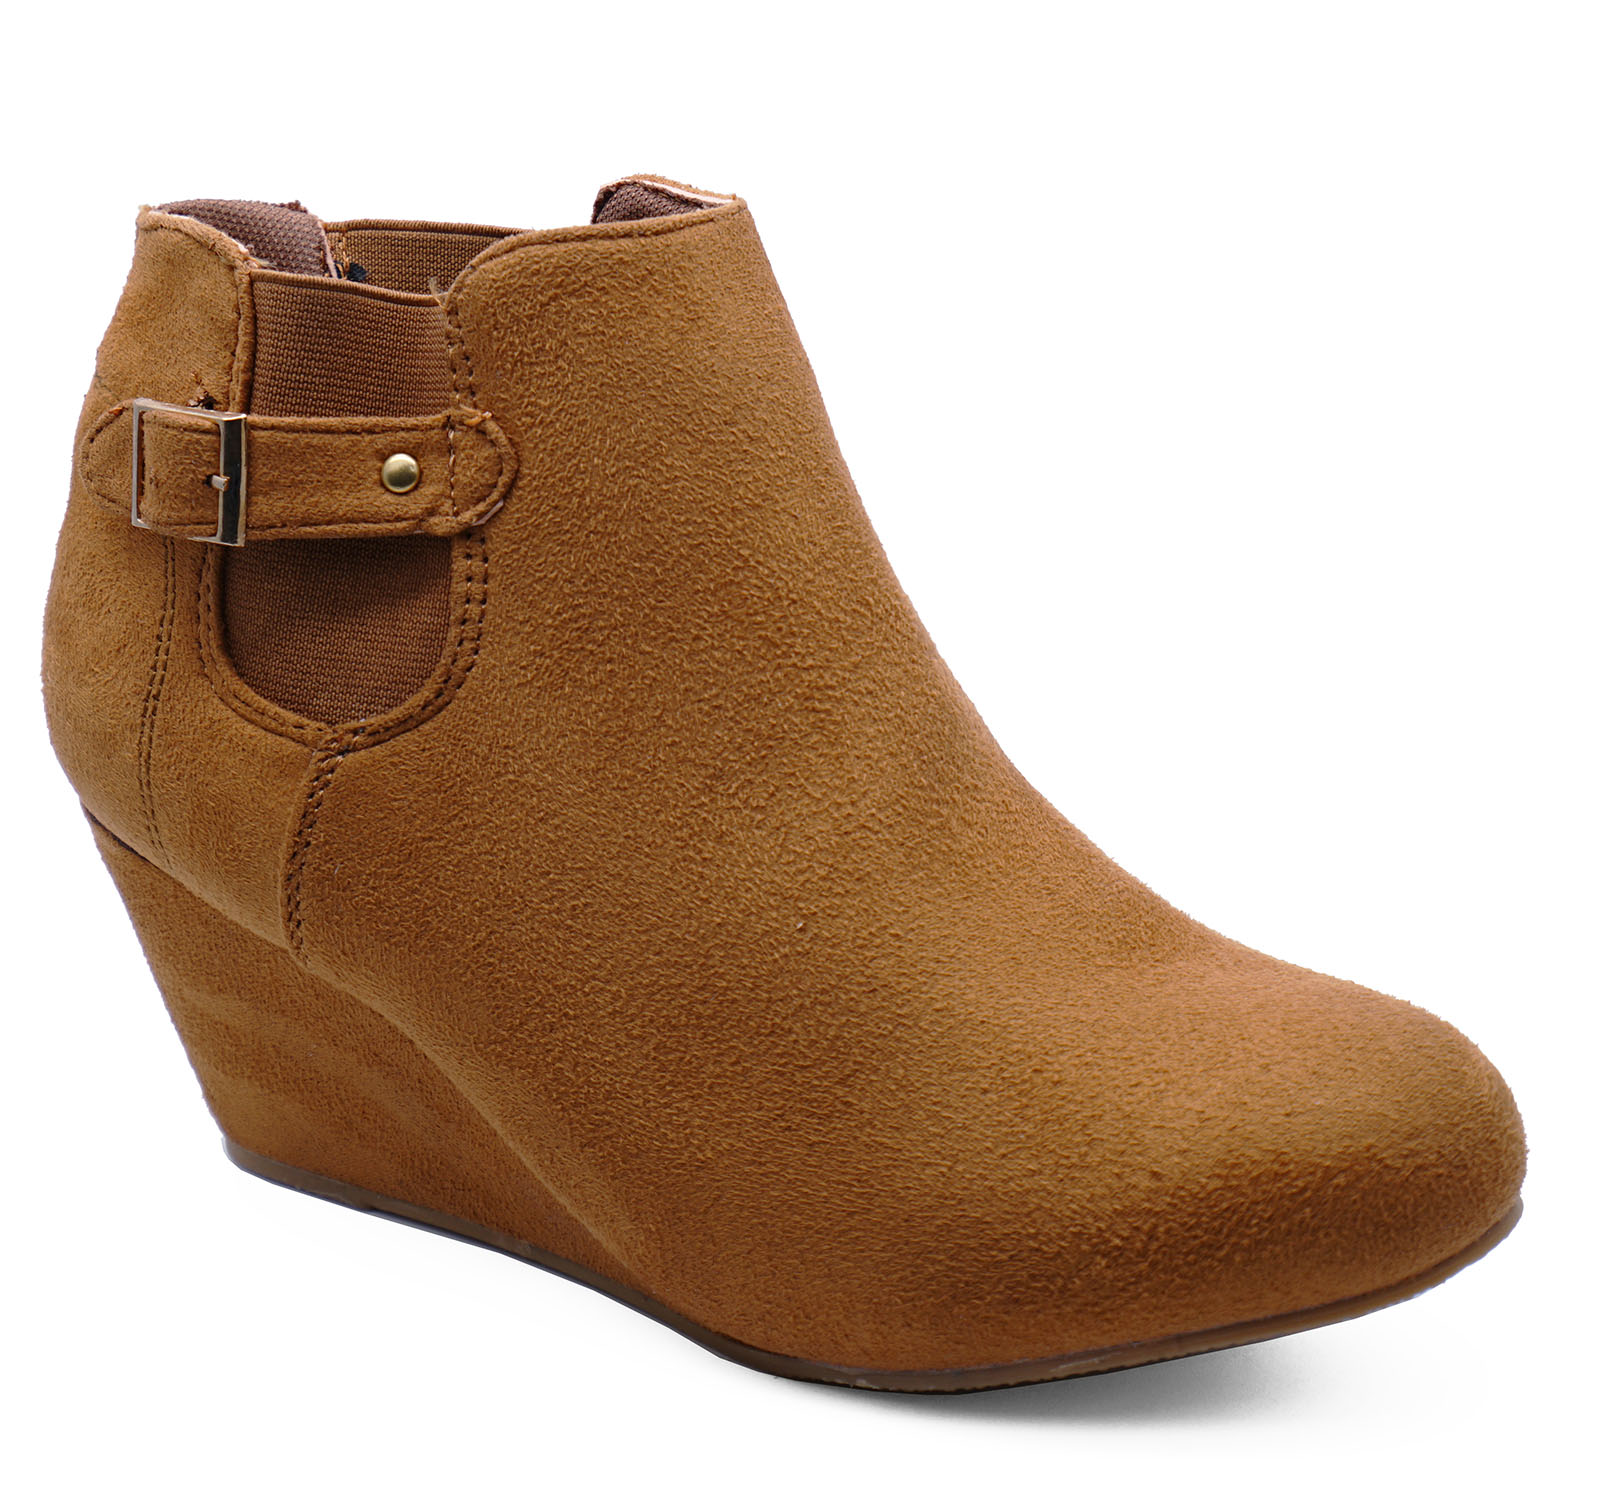 LADIES TAN LOW-WEDGE PULL-ON CHELSEA ANKLE BOOTS COMFY CASUAL SHOES ...